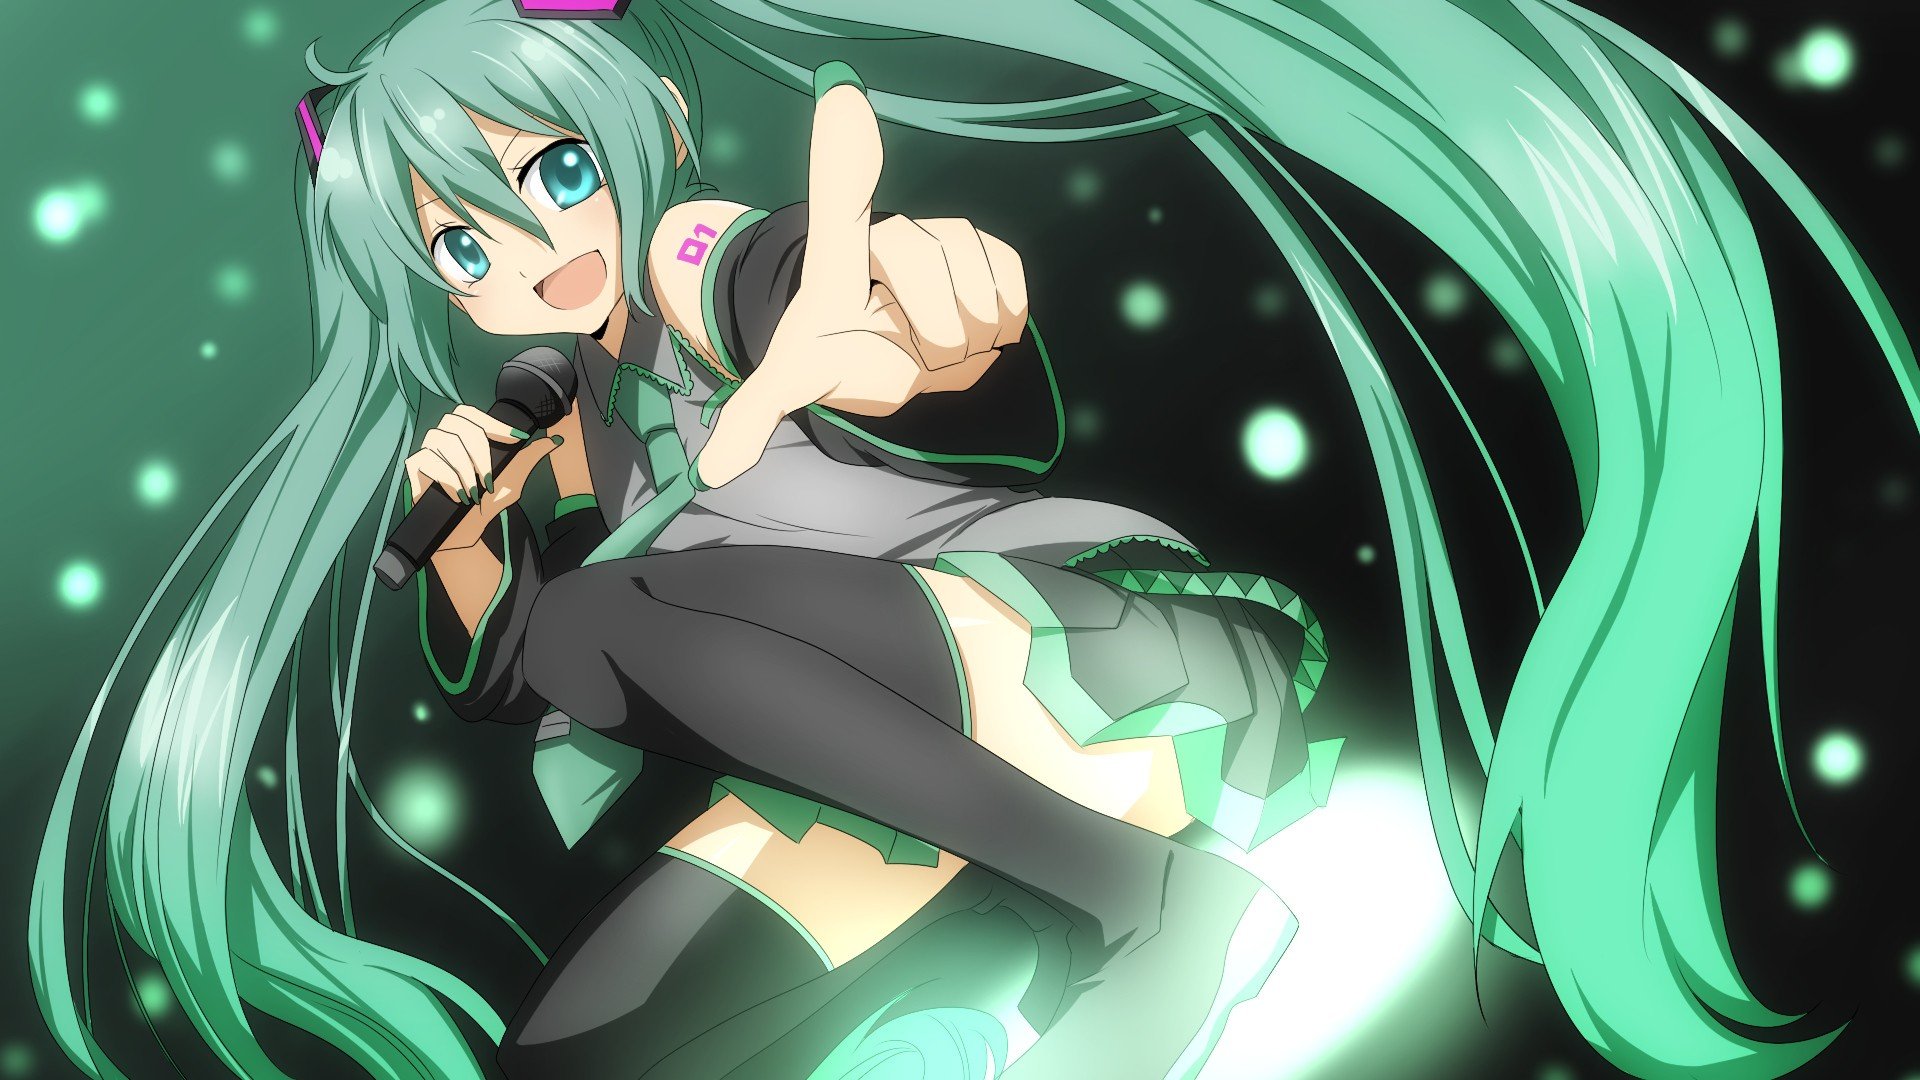 Beautiful Green Haired Anime Girl PNG Image  Transparent PNG Free Download  on SeekPNG